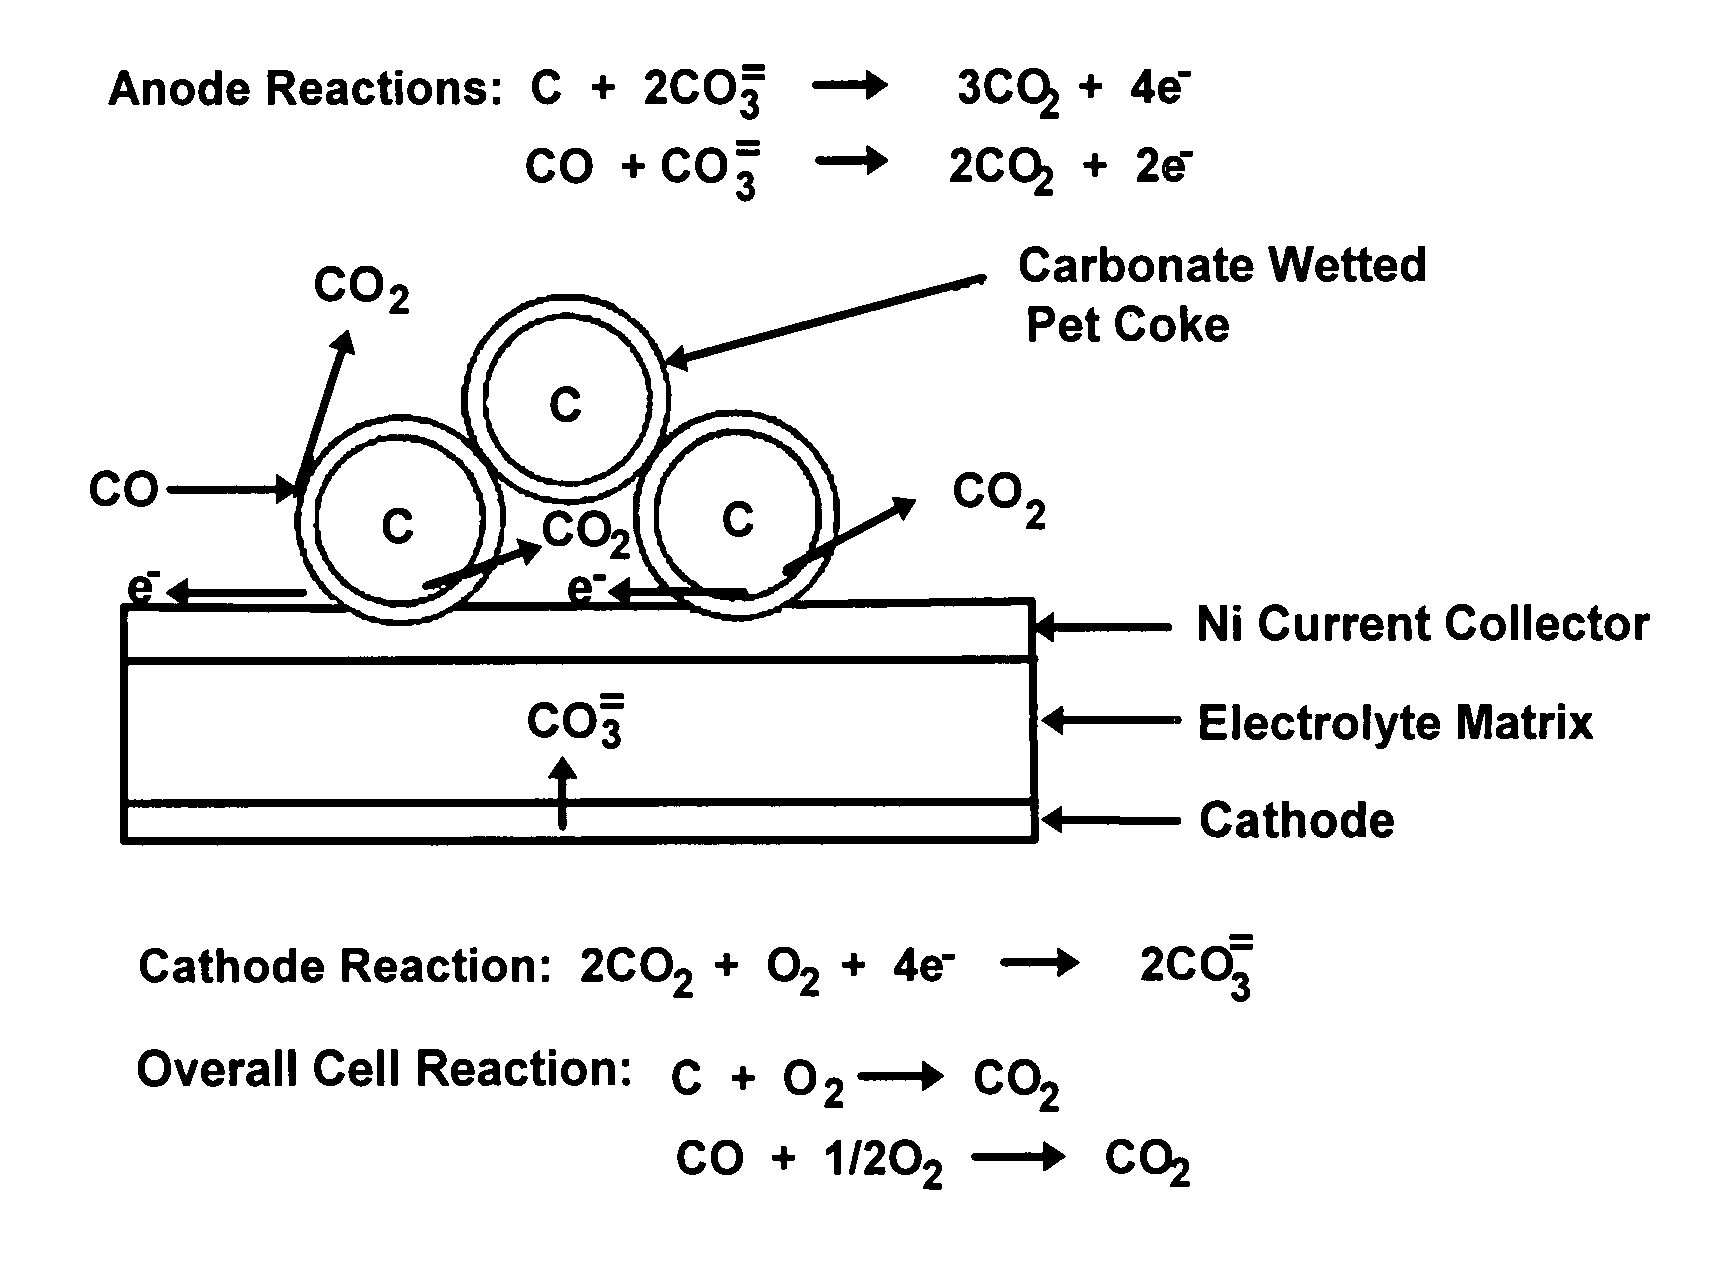 Direct carbon fuel cell with pre-wetted carbon particles